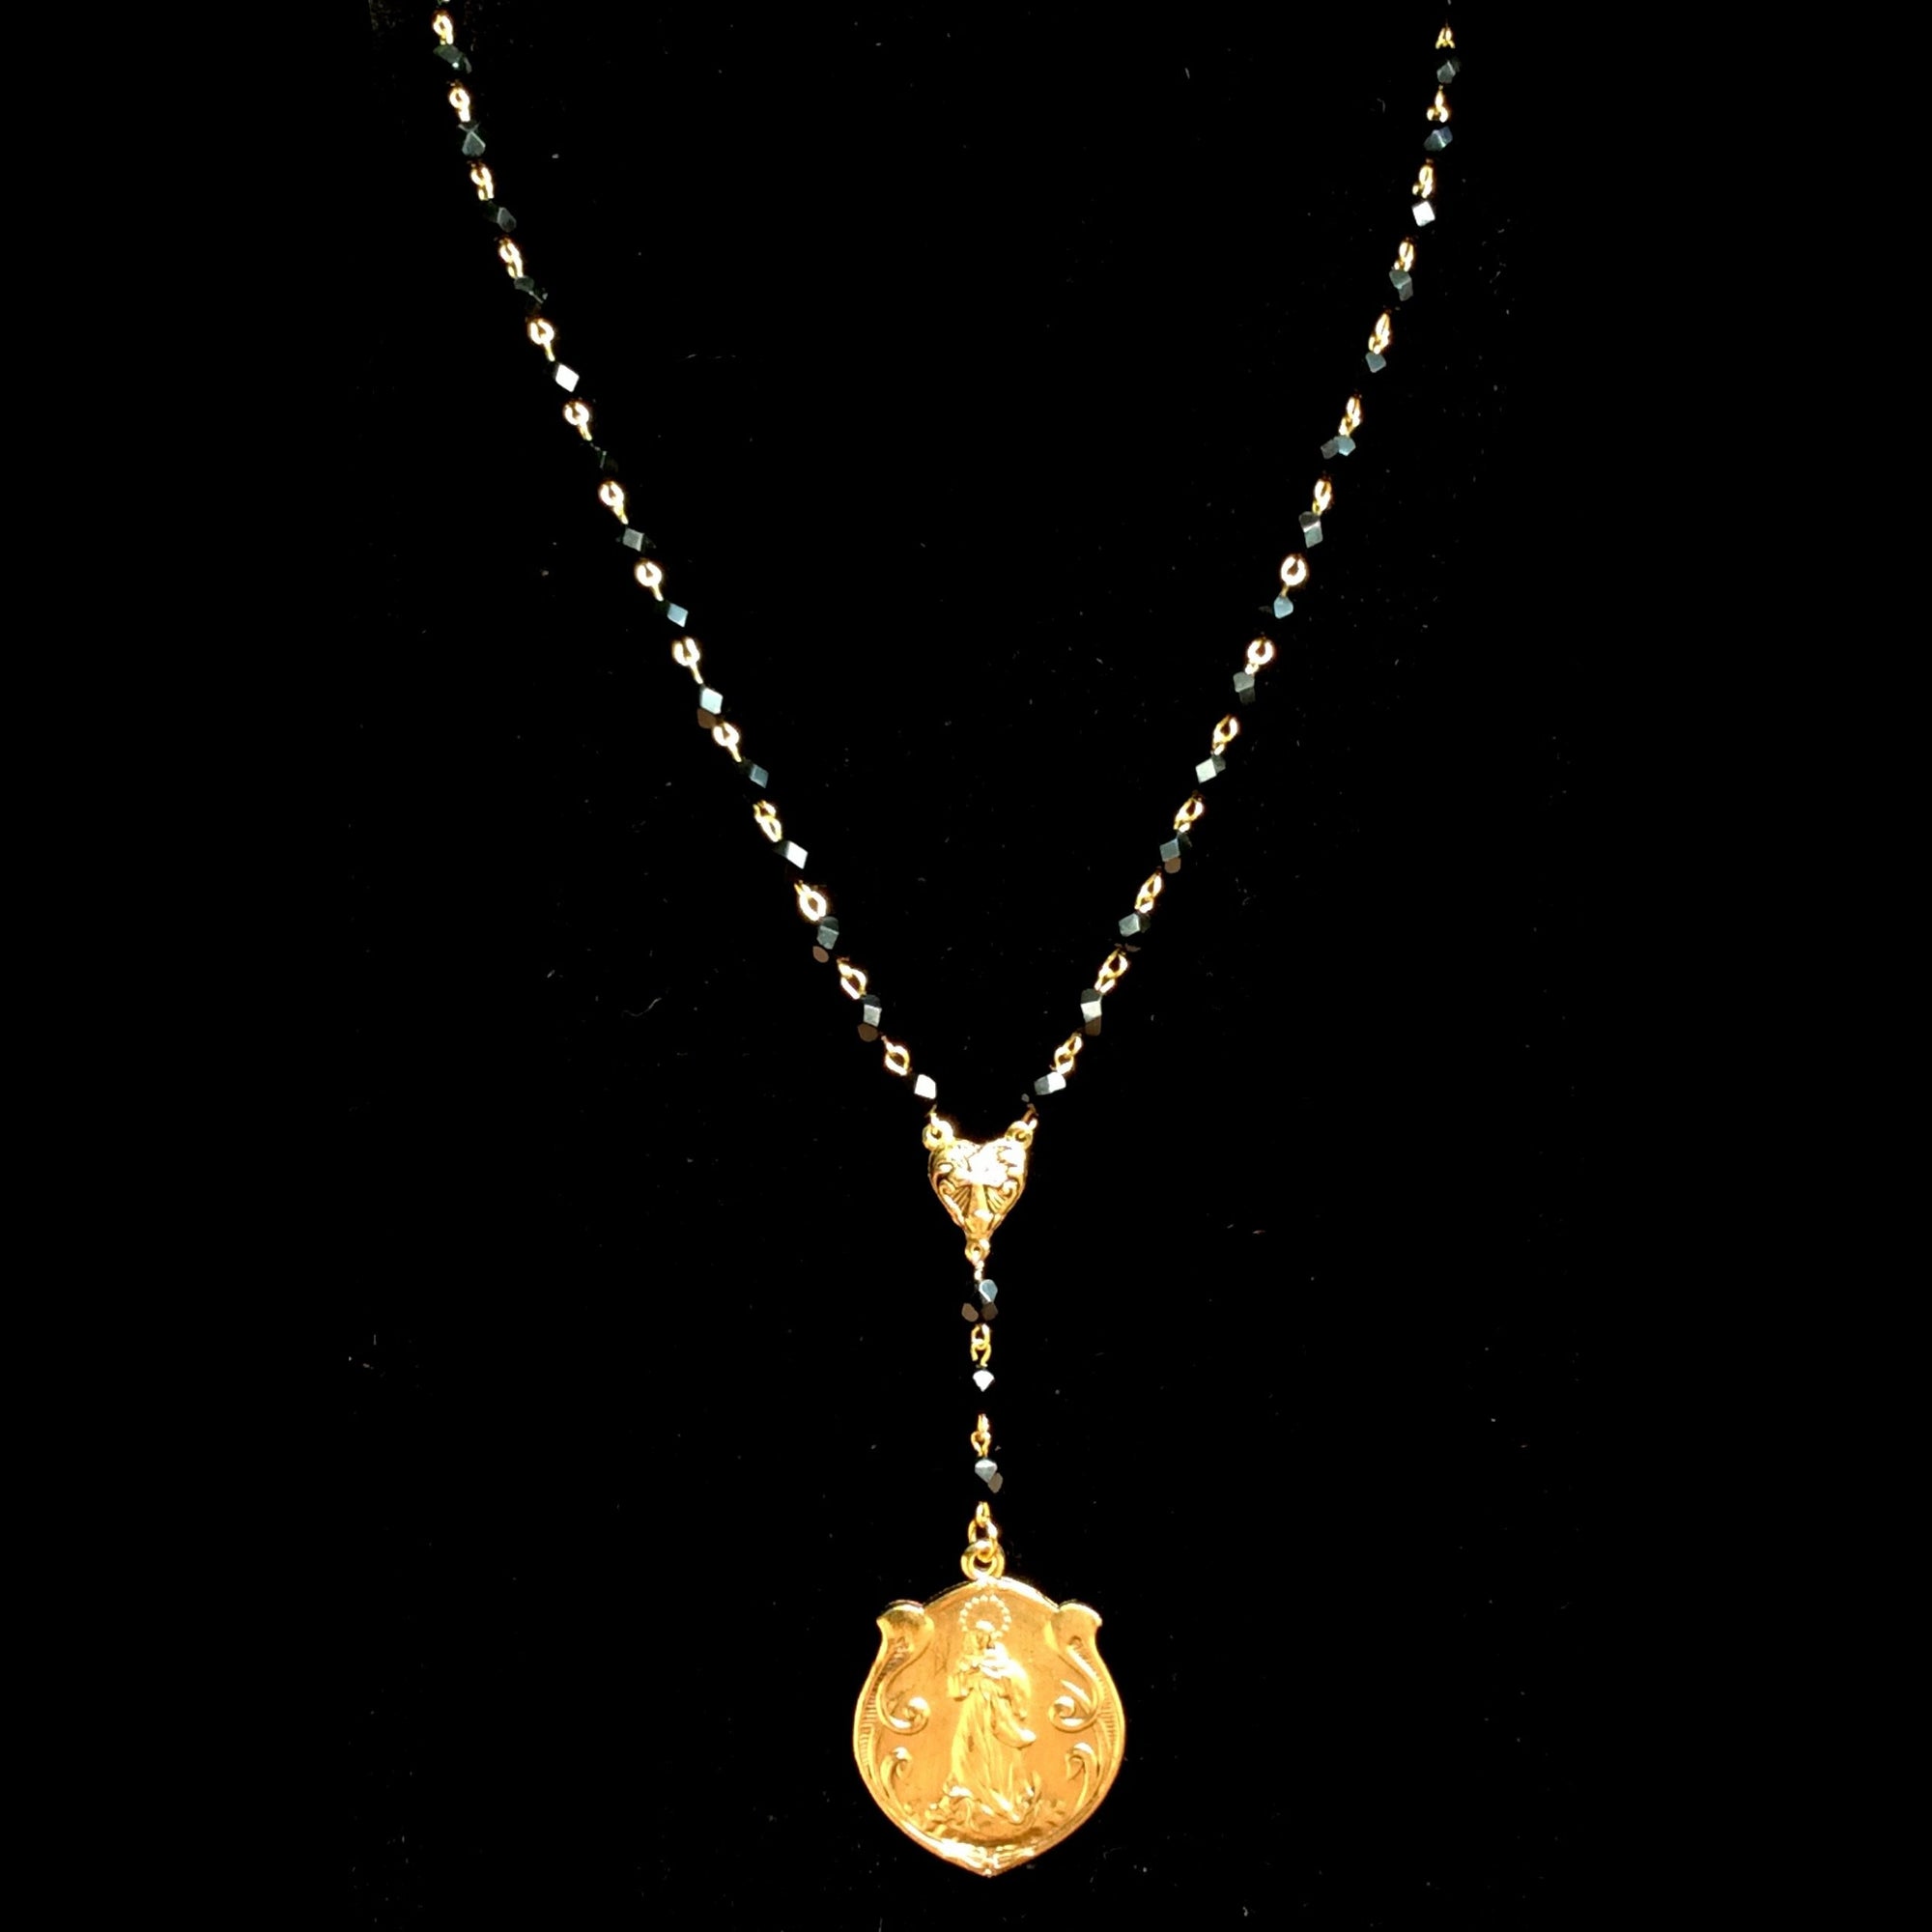 Our Lady of the Assumption Necklace in Black Jet & Gold by Whispering Goddess